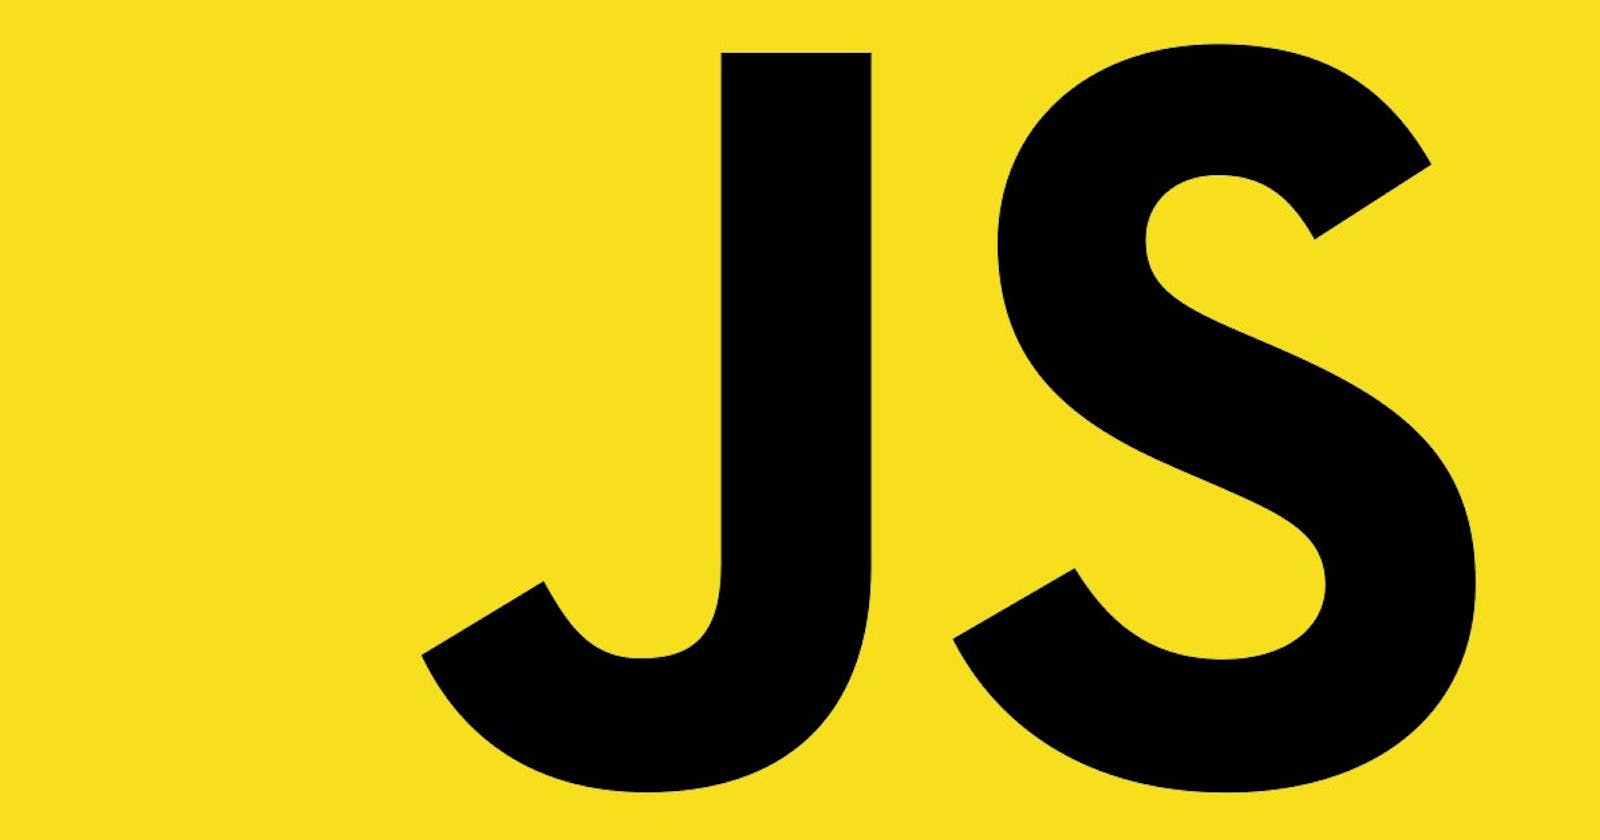 How to modify HTML elements using JavaScript